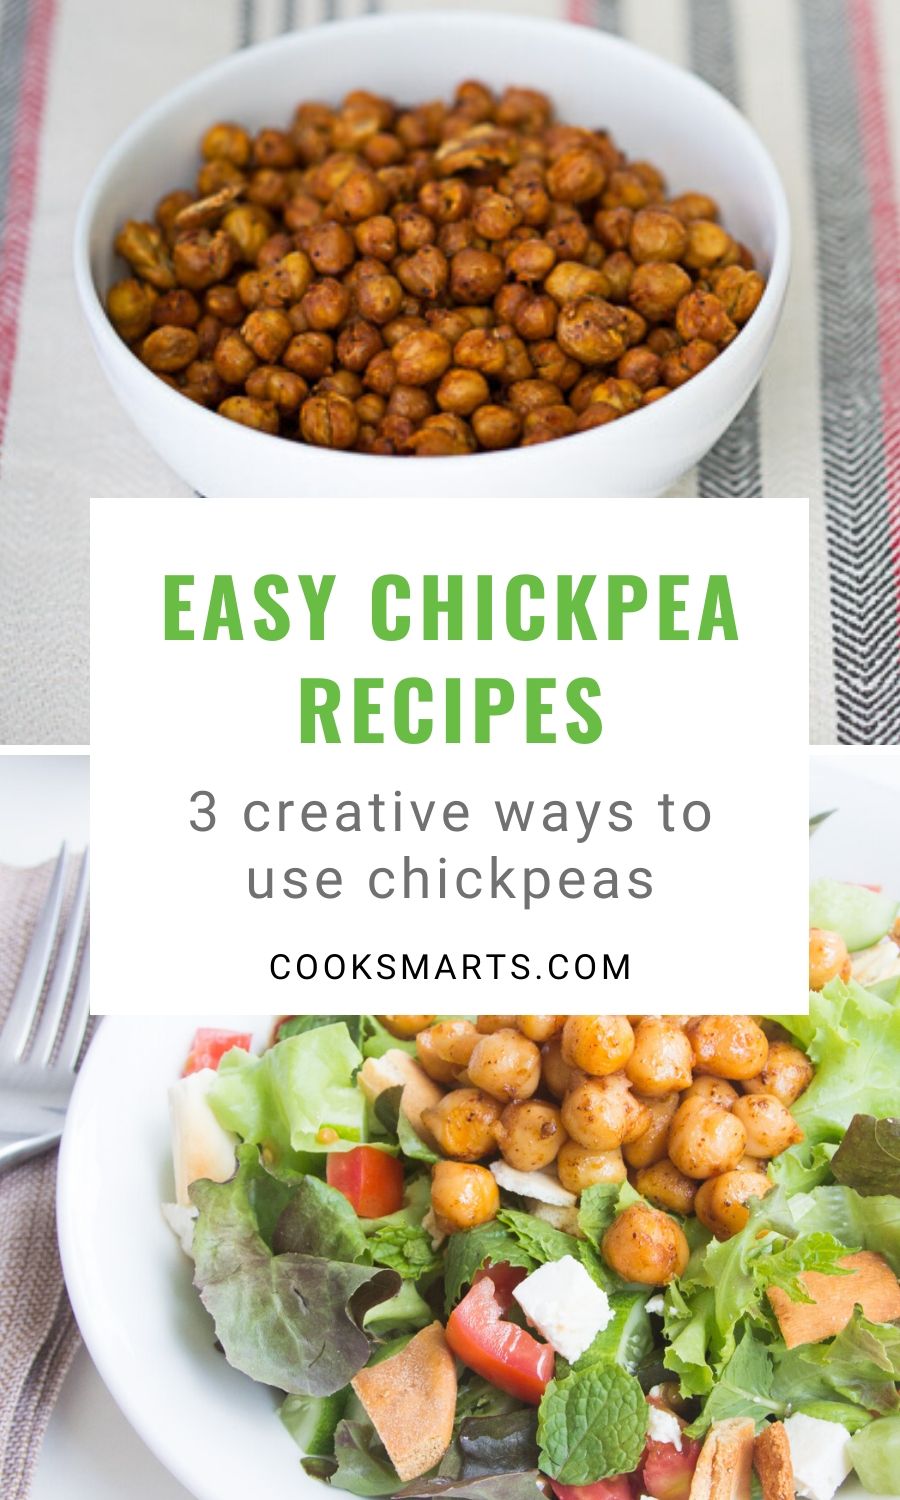 3 Ways to Use Chickpeas | Cook Smarts